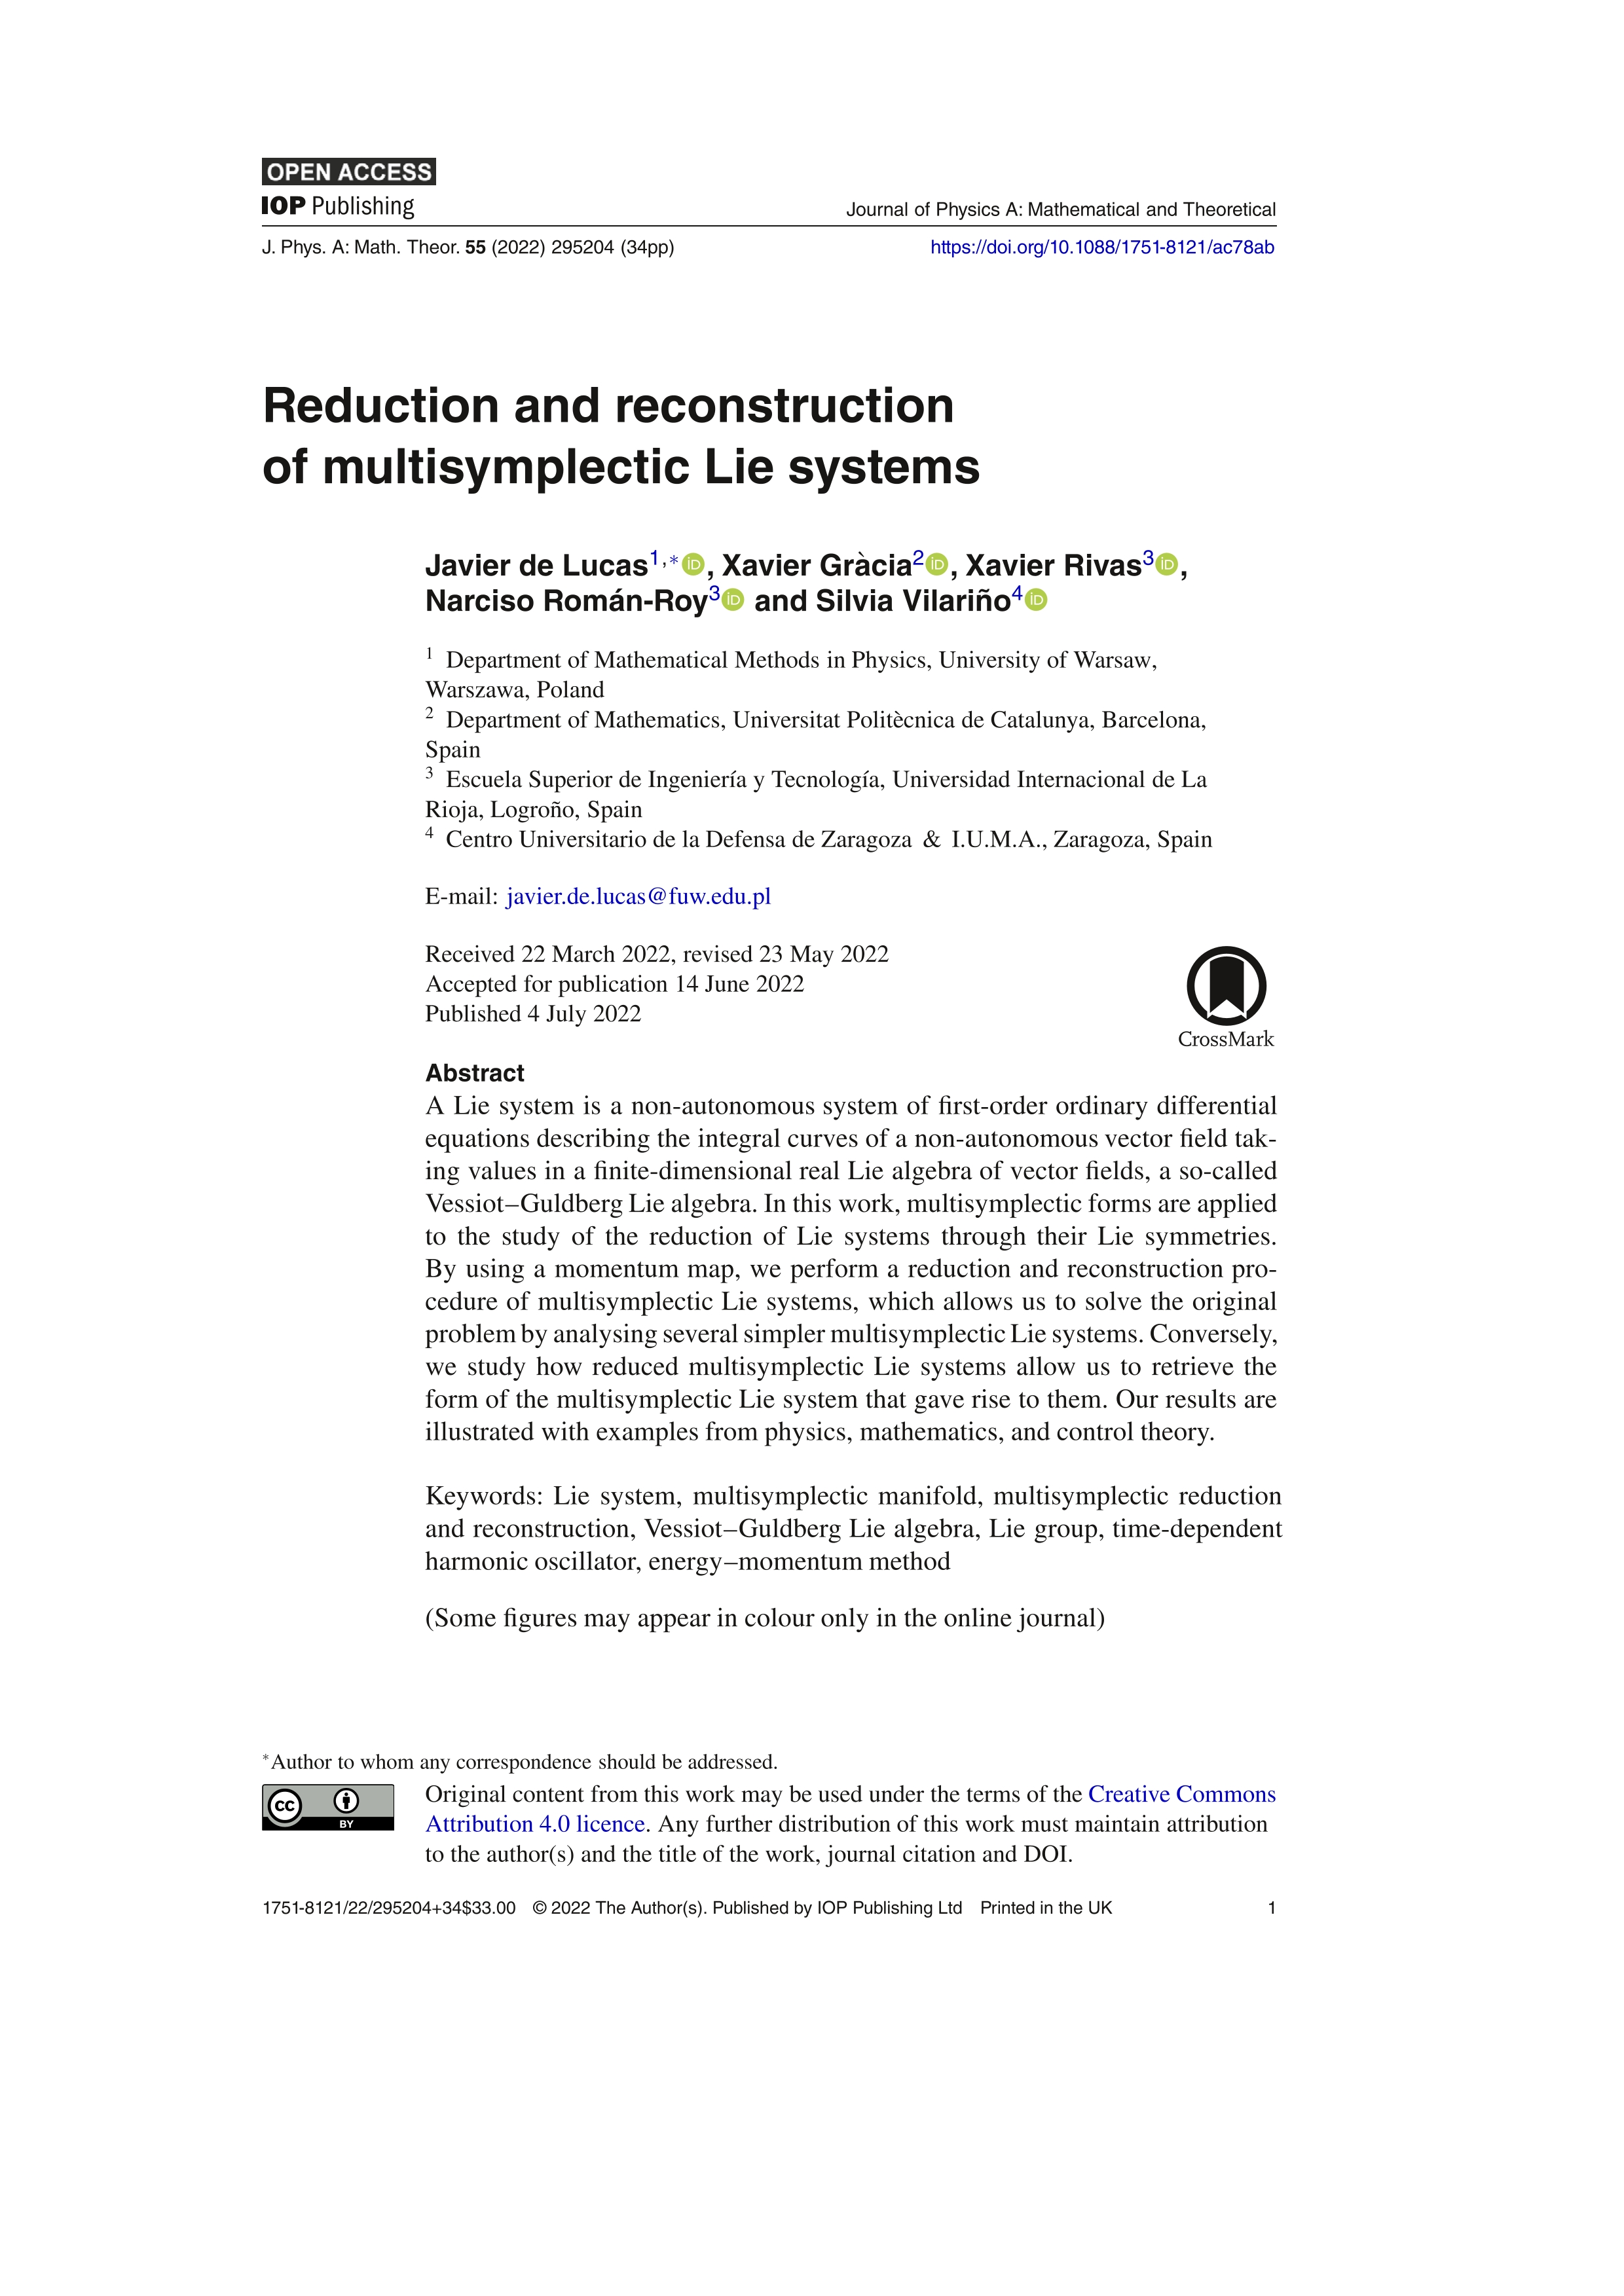 Reduction and reconstruction of multisymplectic Lie systems